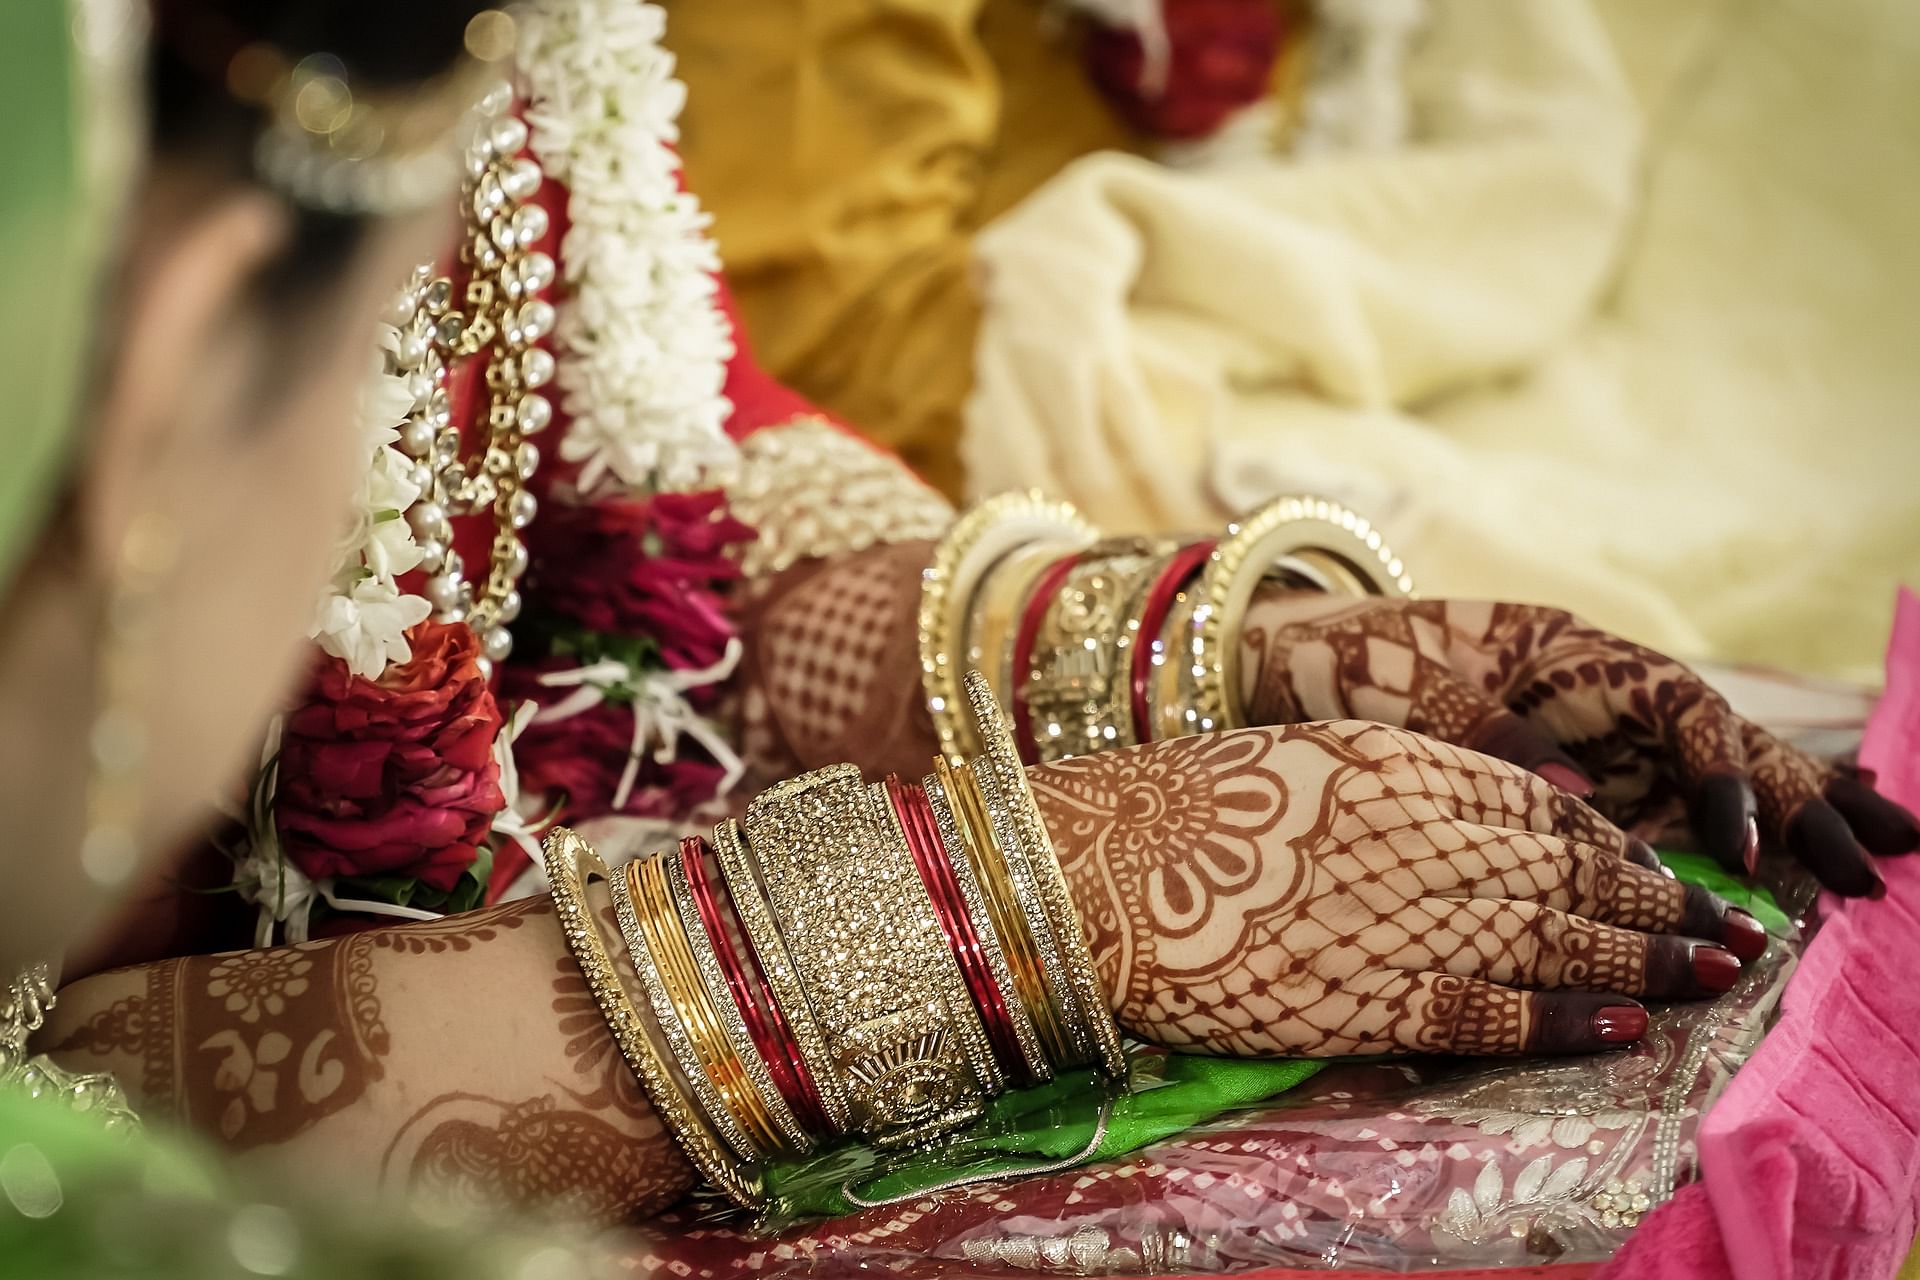 "The wedding, which was supposed to be held in the second week of February, has been called off now," said bride's father. Representative image: Pixabay